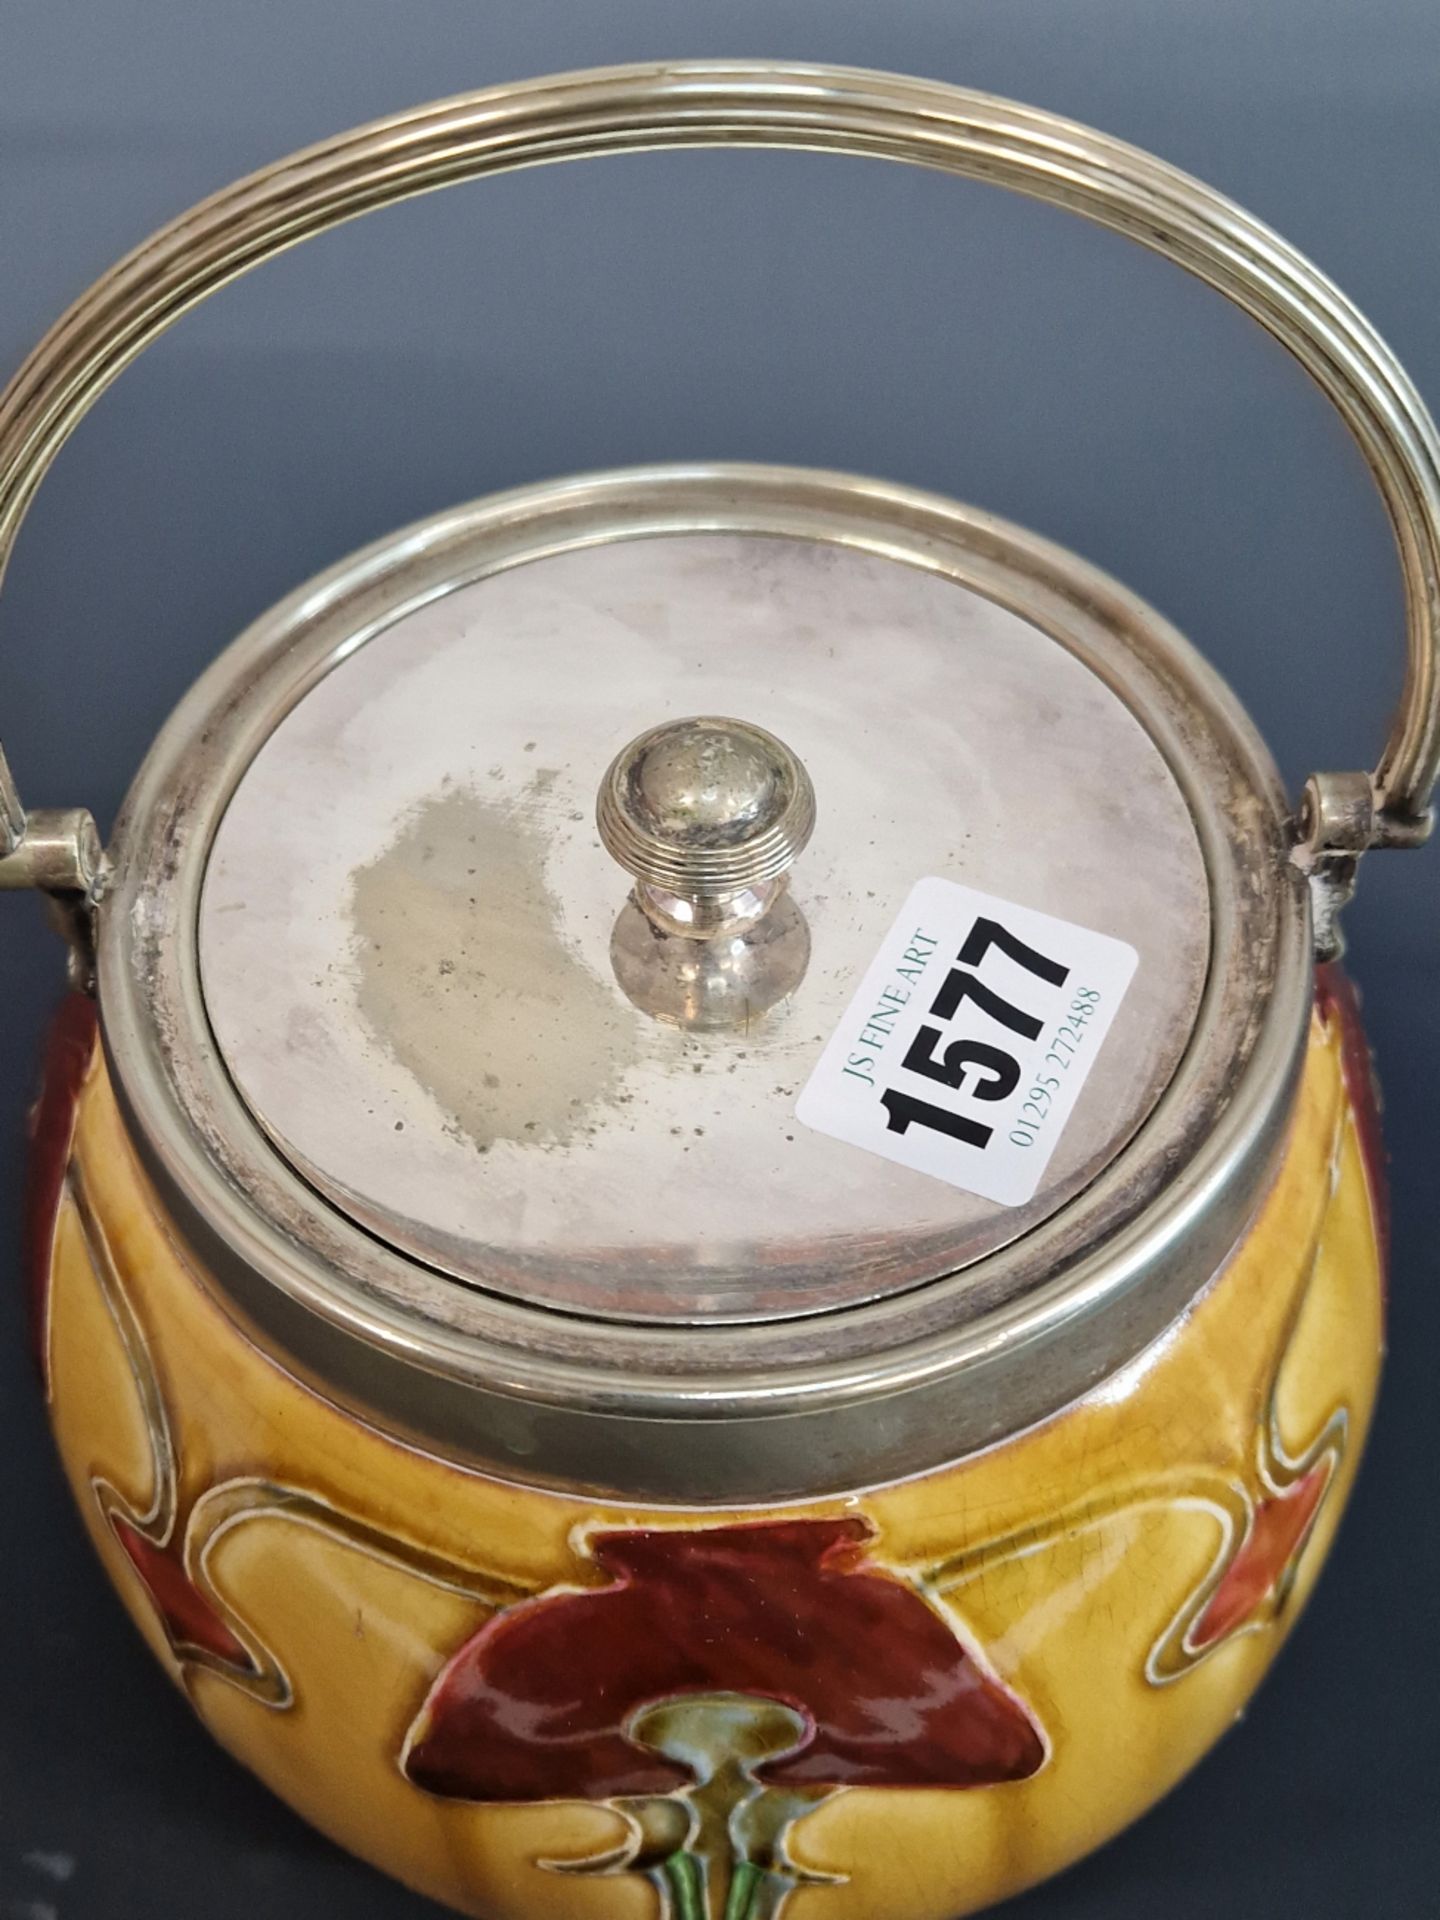 DOULTON?- AN ART NOUVEAU BISCUIT BARREL WITH SILVER PLATED MOUNTS. YELLOW GROUND BODY WITH - Image 2 of 3